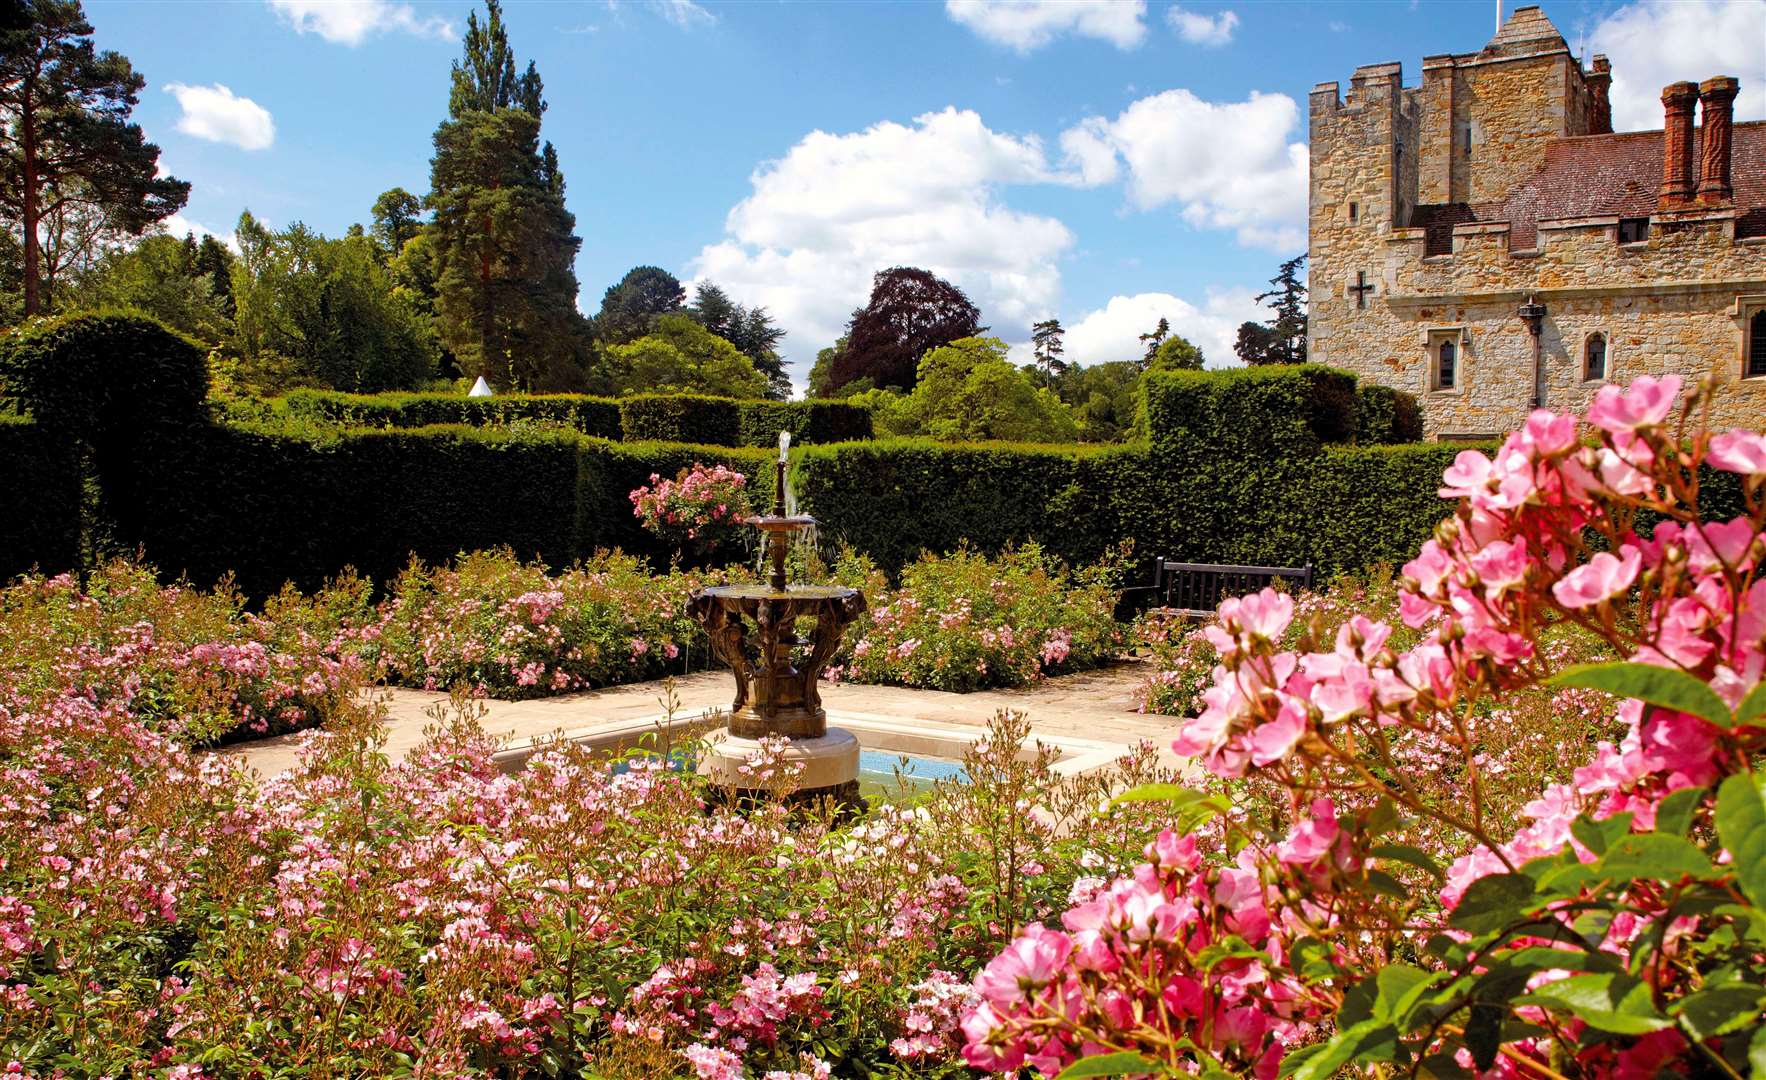 Val Bourne is an organic gardener who has been growing roses for 17 years. Picture: Hever Caste and Gardens